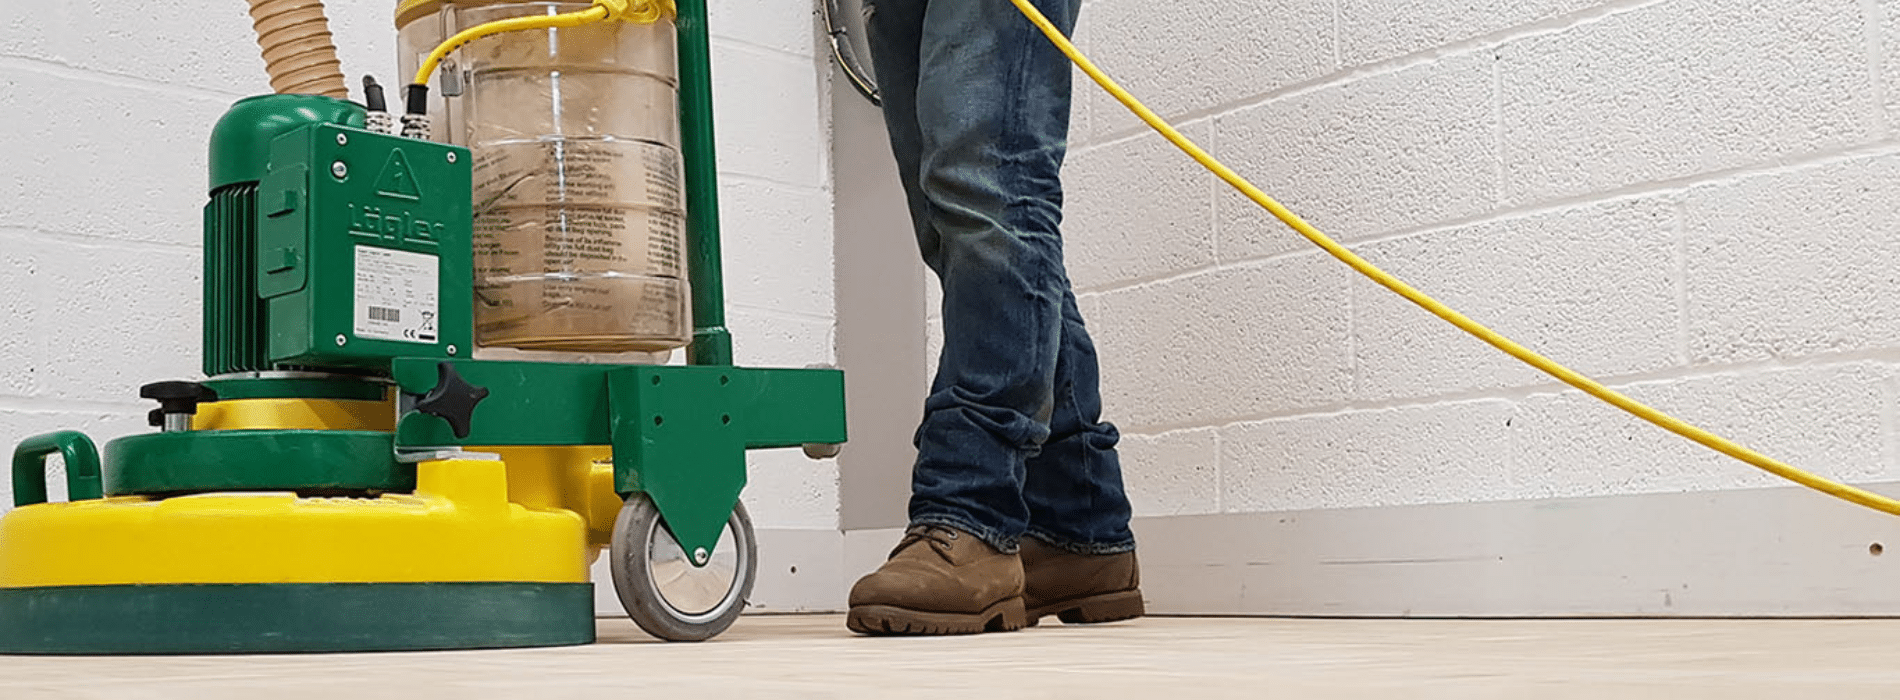 In Burgess Hill, RH15, Mr Sander® use the Bona FlexiSand 1.9, a powerful buffer sander (Ø 407 mm) with 1.9 kW effect, 230 V voltage, and 50 Hz/60 Hz frequency. It is connected to a dust extraction system equipped with a HEPA filter, ensuring a clean and efficient sanding process for parquet floors.